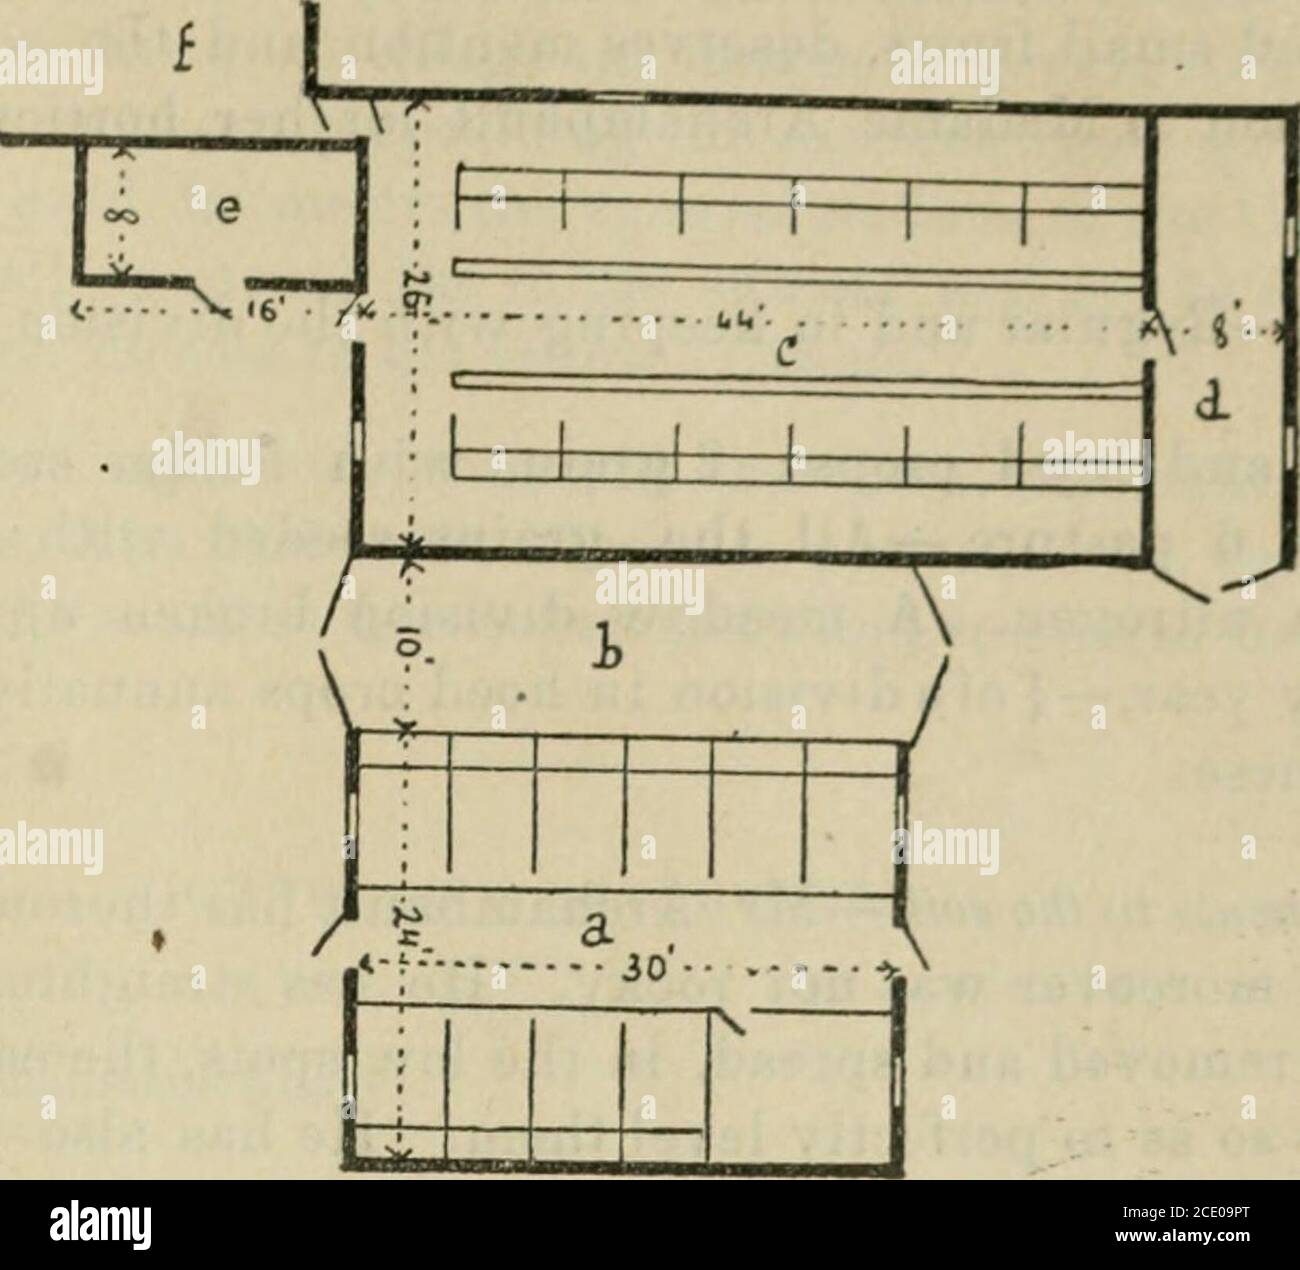 Rapport Fig 97lnst Vllation And Relative Arrangement Of The Buildings A Road 6 Entrance Avenue C Green Plot D Lawn Ornamental Trees And Flowers E Kitchen And Fruit Garden 3 74 House